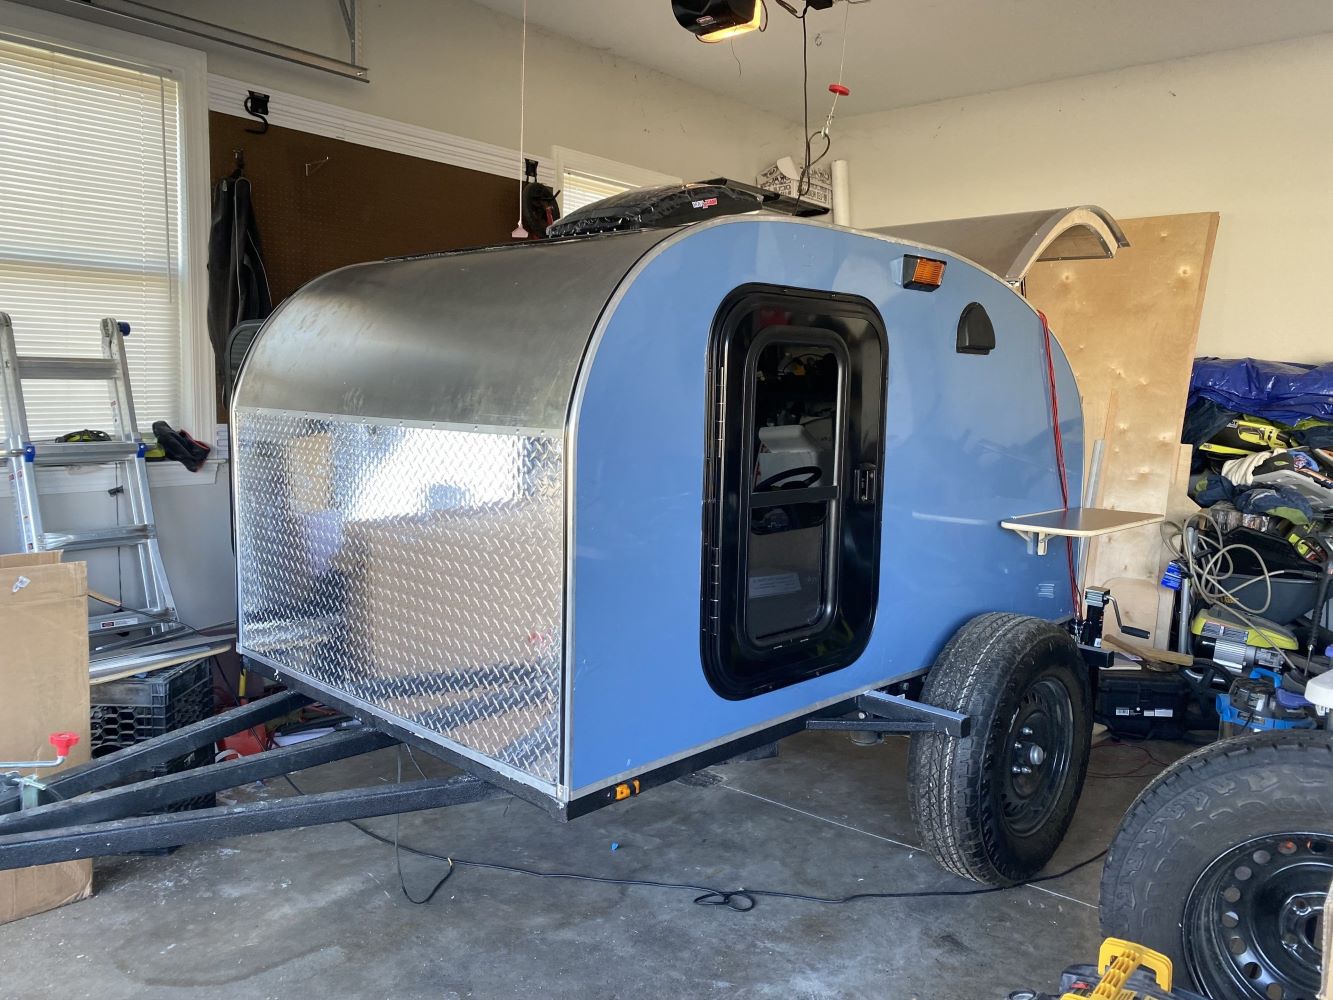 DIY Camper Trailer: How To Build Your Own Mobile Adventure